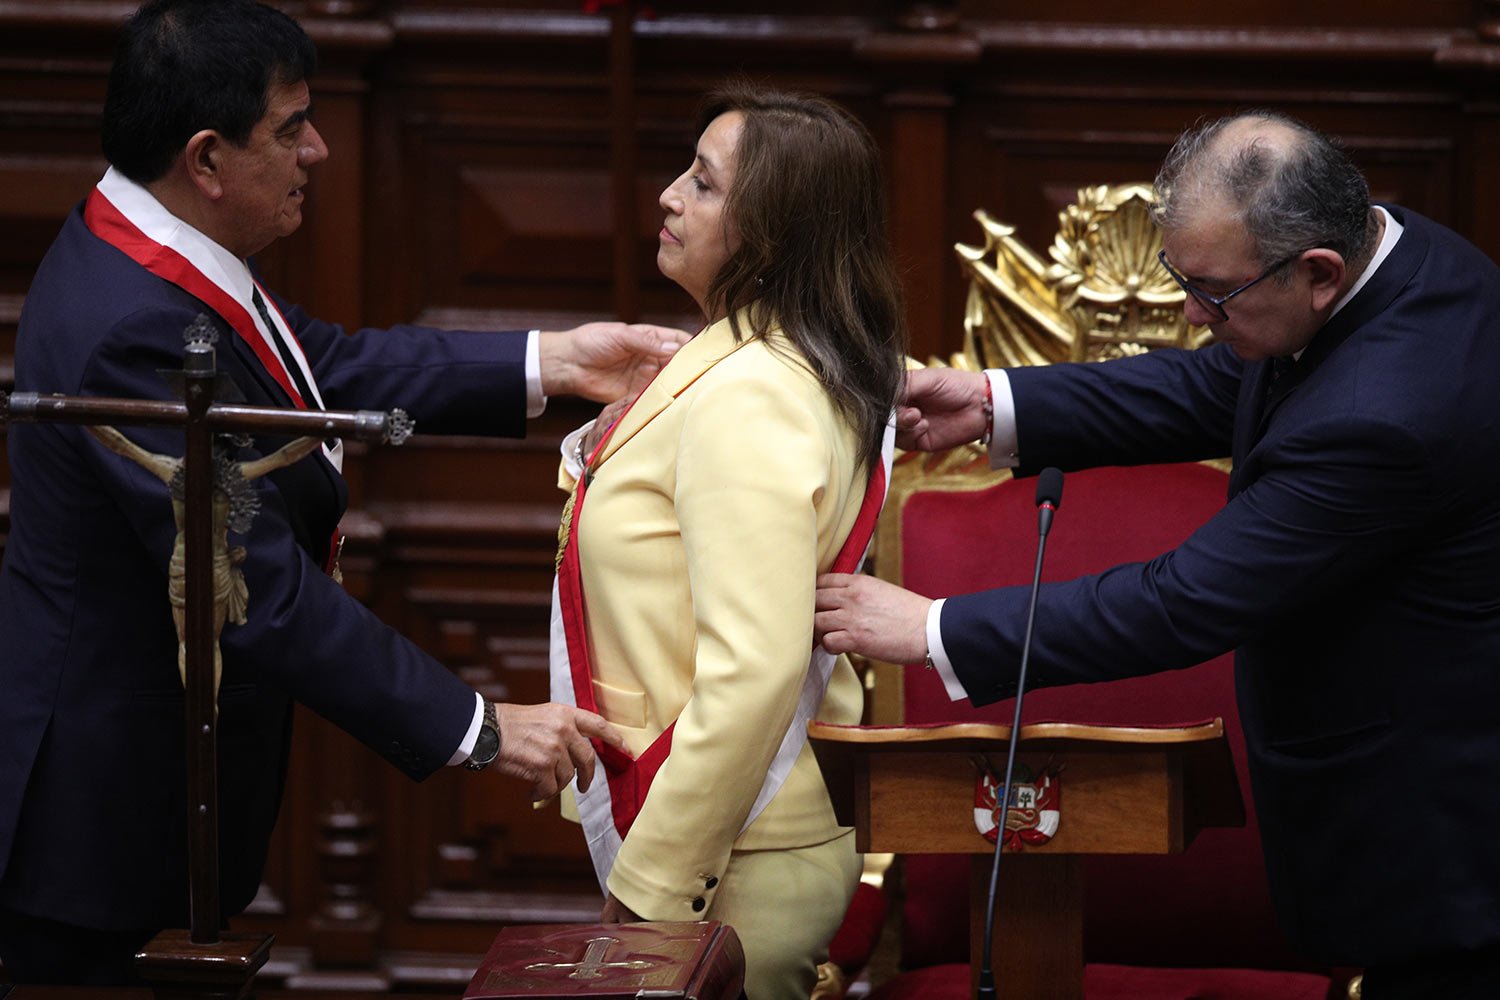  Former Vice President Dina Boluarte receives the presidential sash as she is sworn-in as the new president at Congress in Lima, Peru, Wednesday, Dec. 7, 2022, after Congress voted to remove President Pedro Castillo from office Wednesday. (AP Photo/G